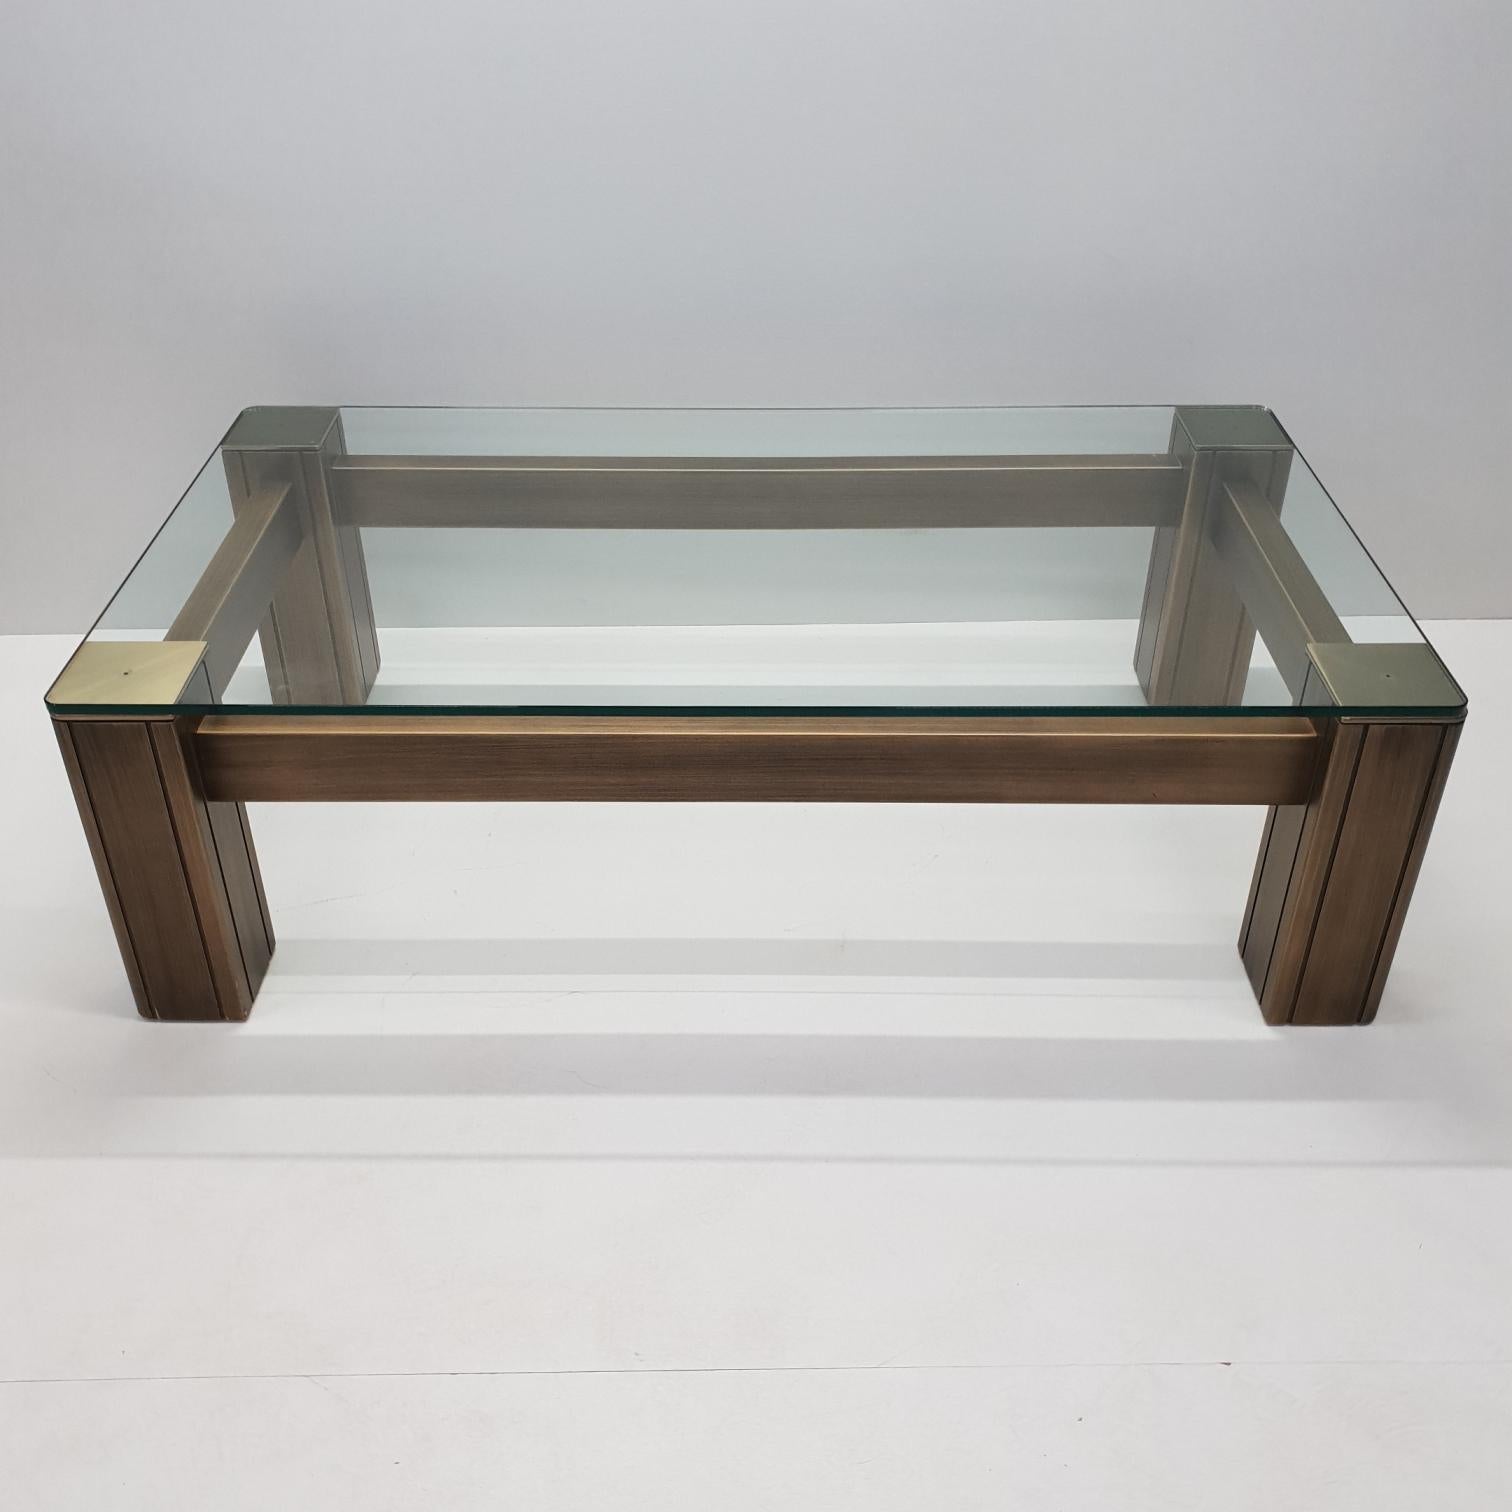 Brass and glass rectangular robust coffee table, 1990s.
Size: 12mm thick glass plate.